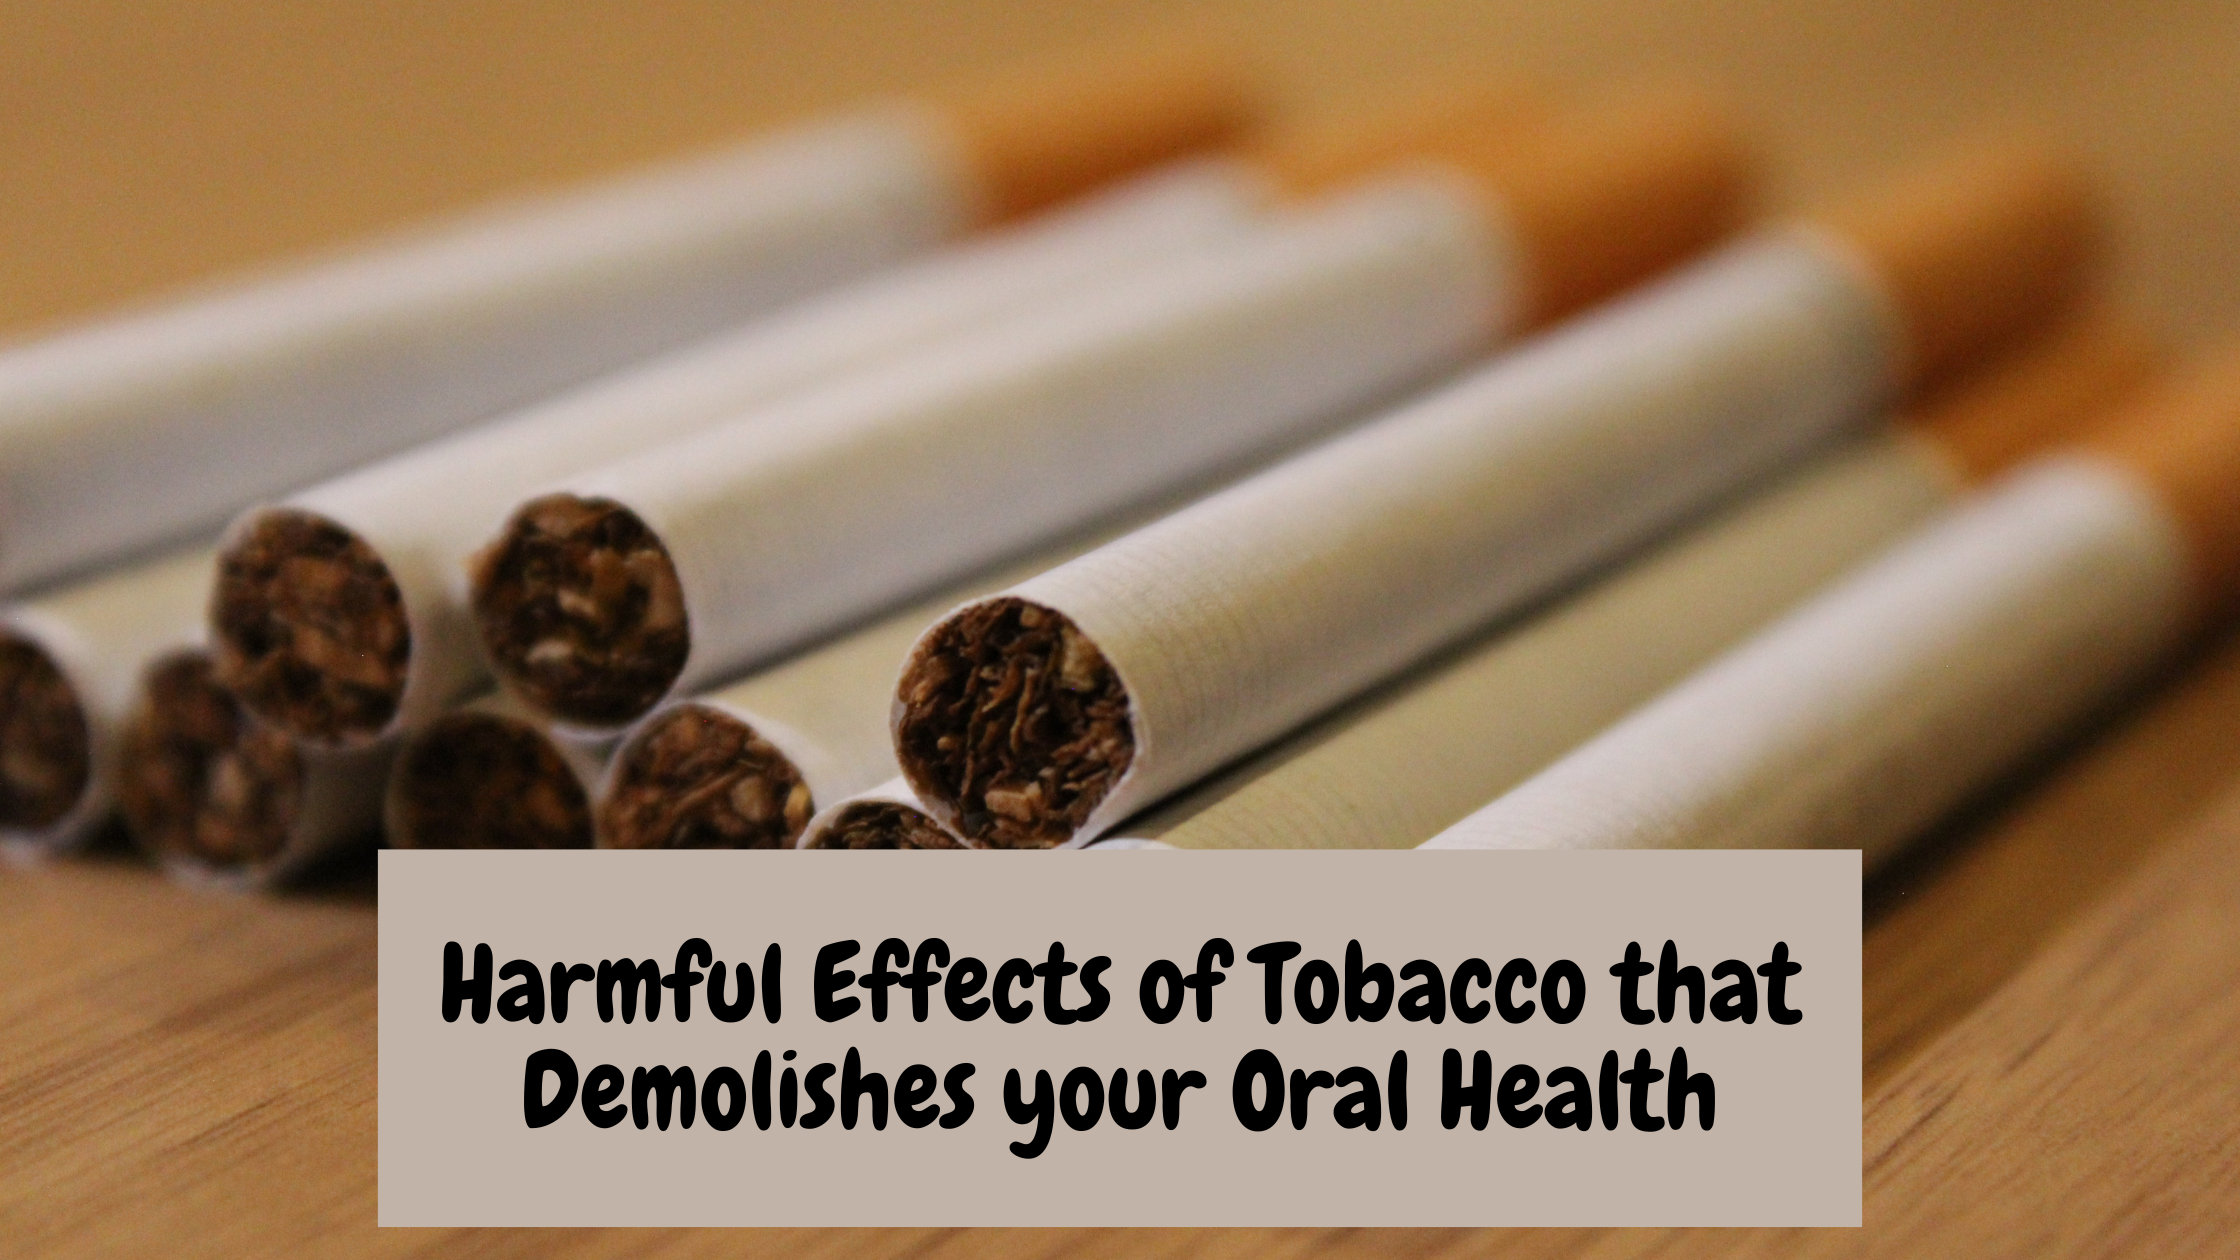 Harmful Effects of Tobacco that Demolishes your Oral Health